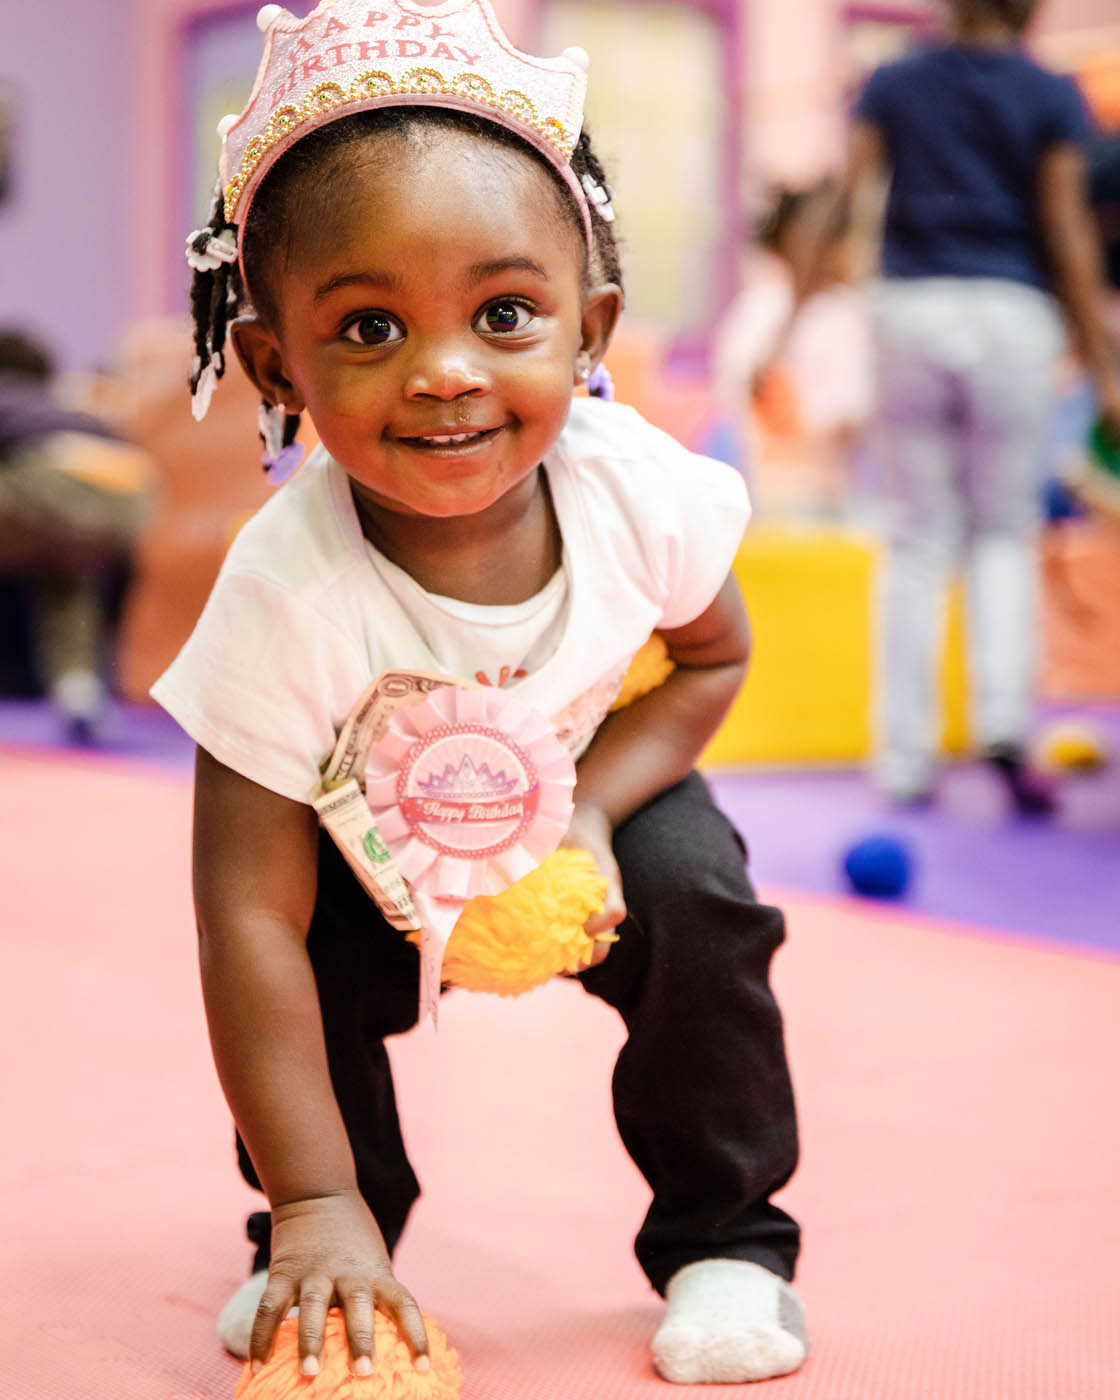 A toddler in a white shirt smiling at the camera, contact us today for toddler activities in Wethersfield.